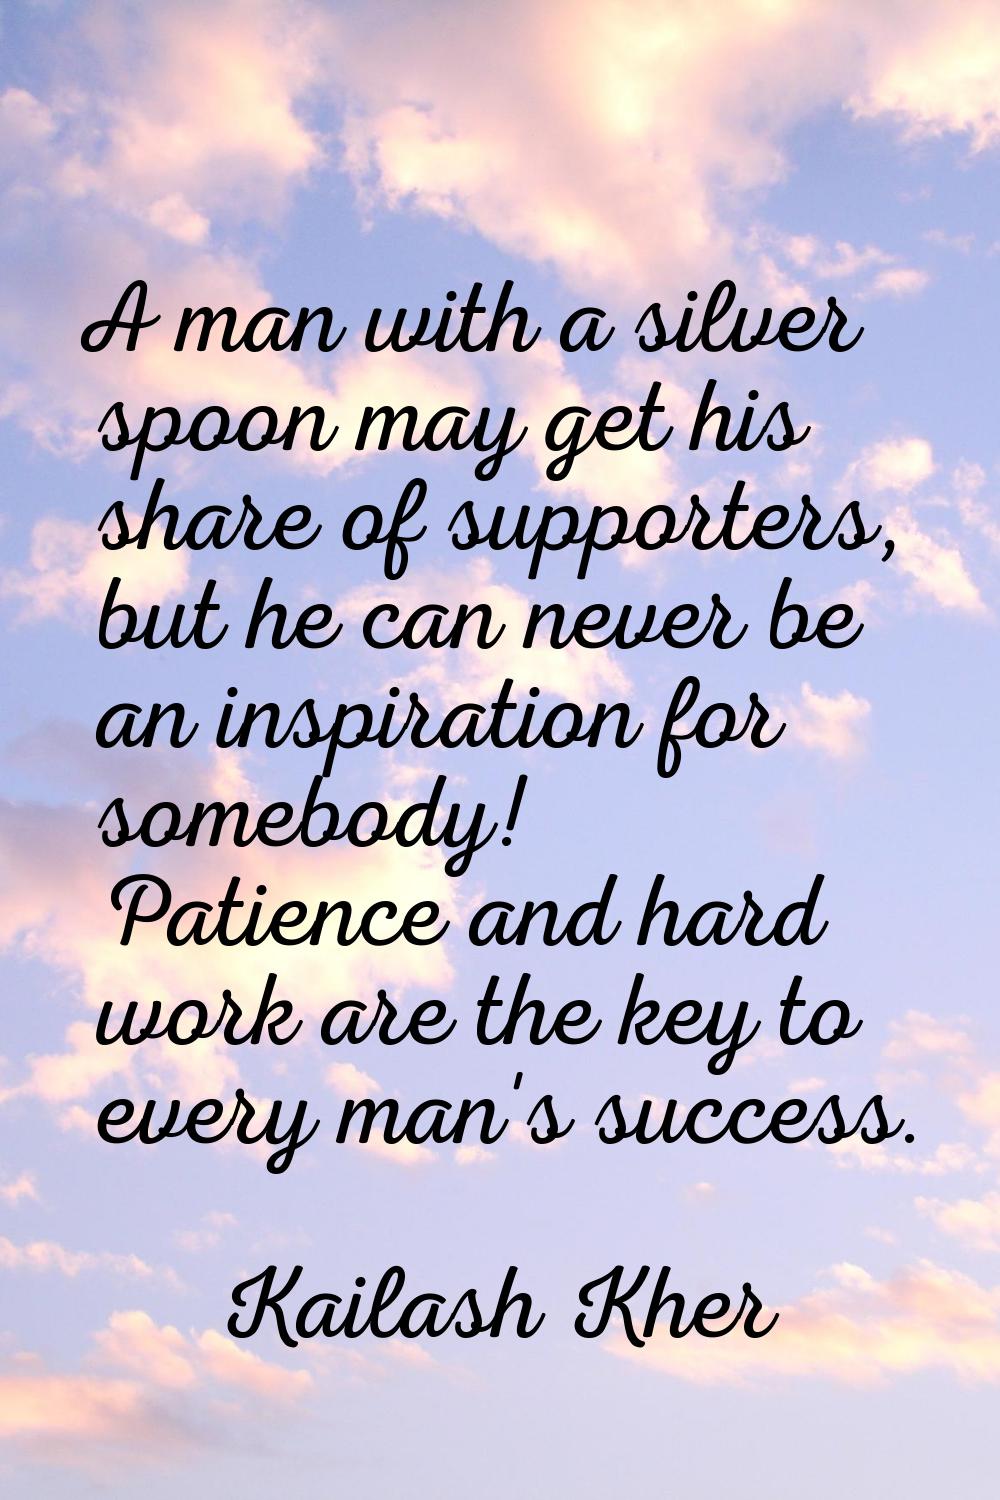 A man with a silver spoon may get his share of supporters, but he can never be an inspiration for s